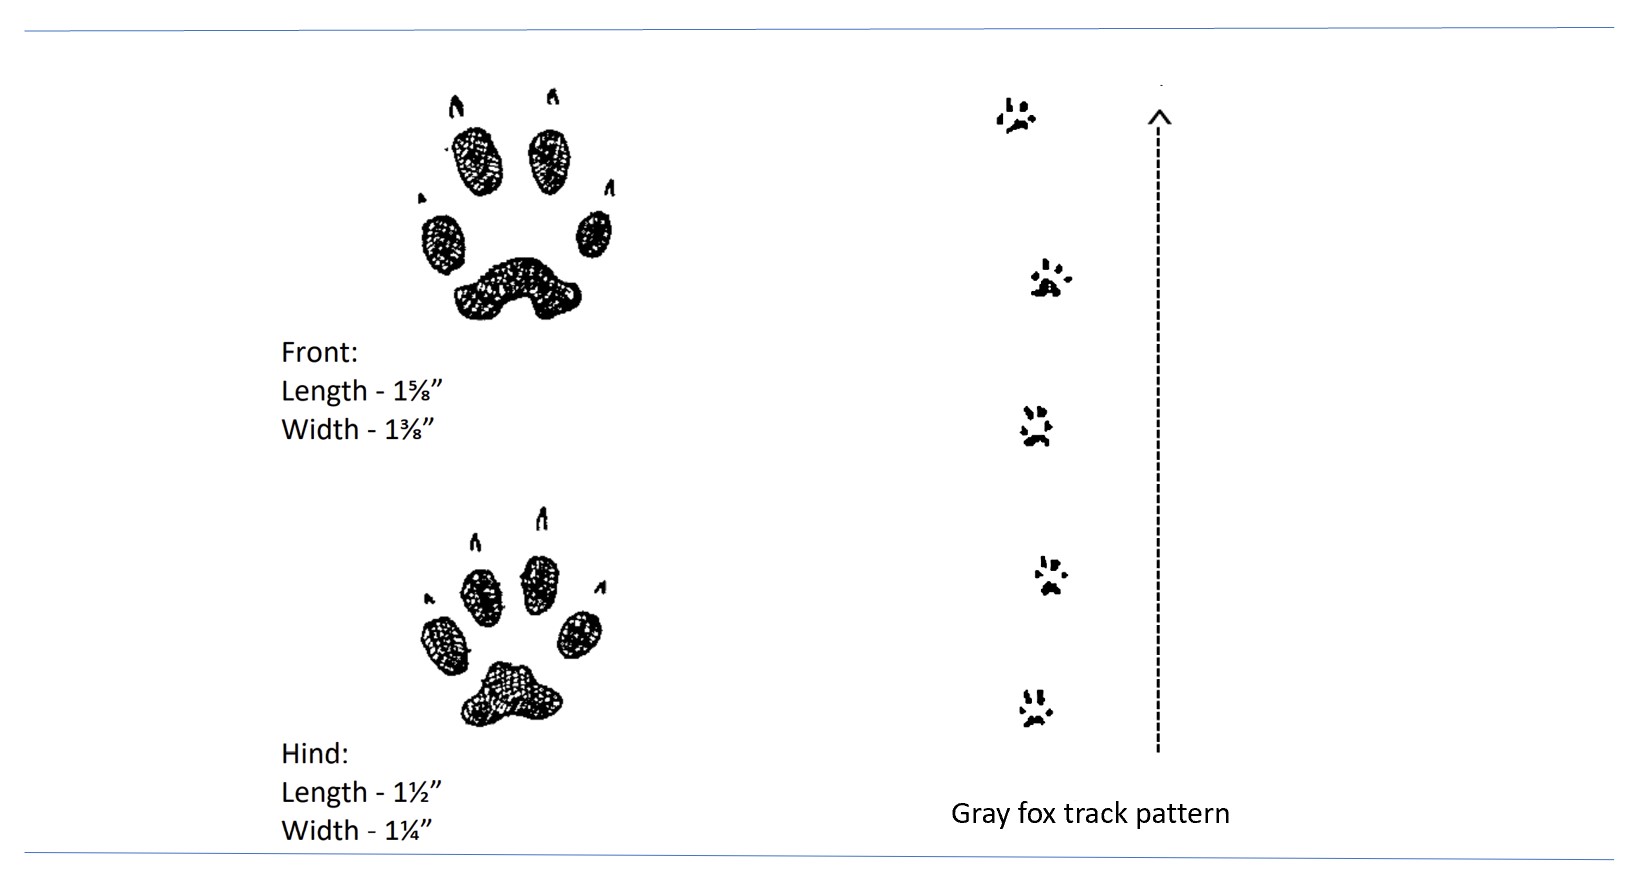 Illustrated tracks of a gray fox.